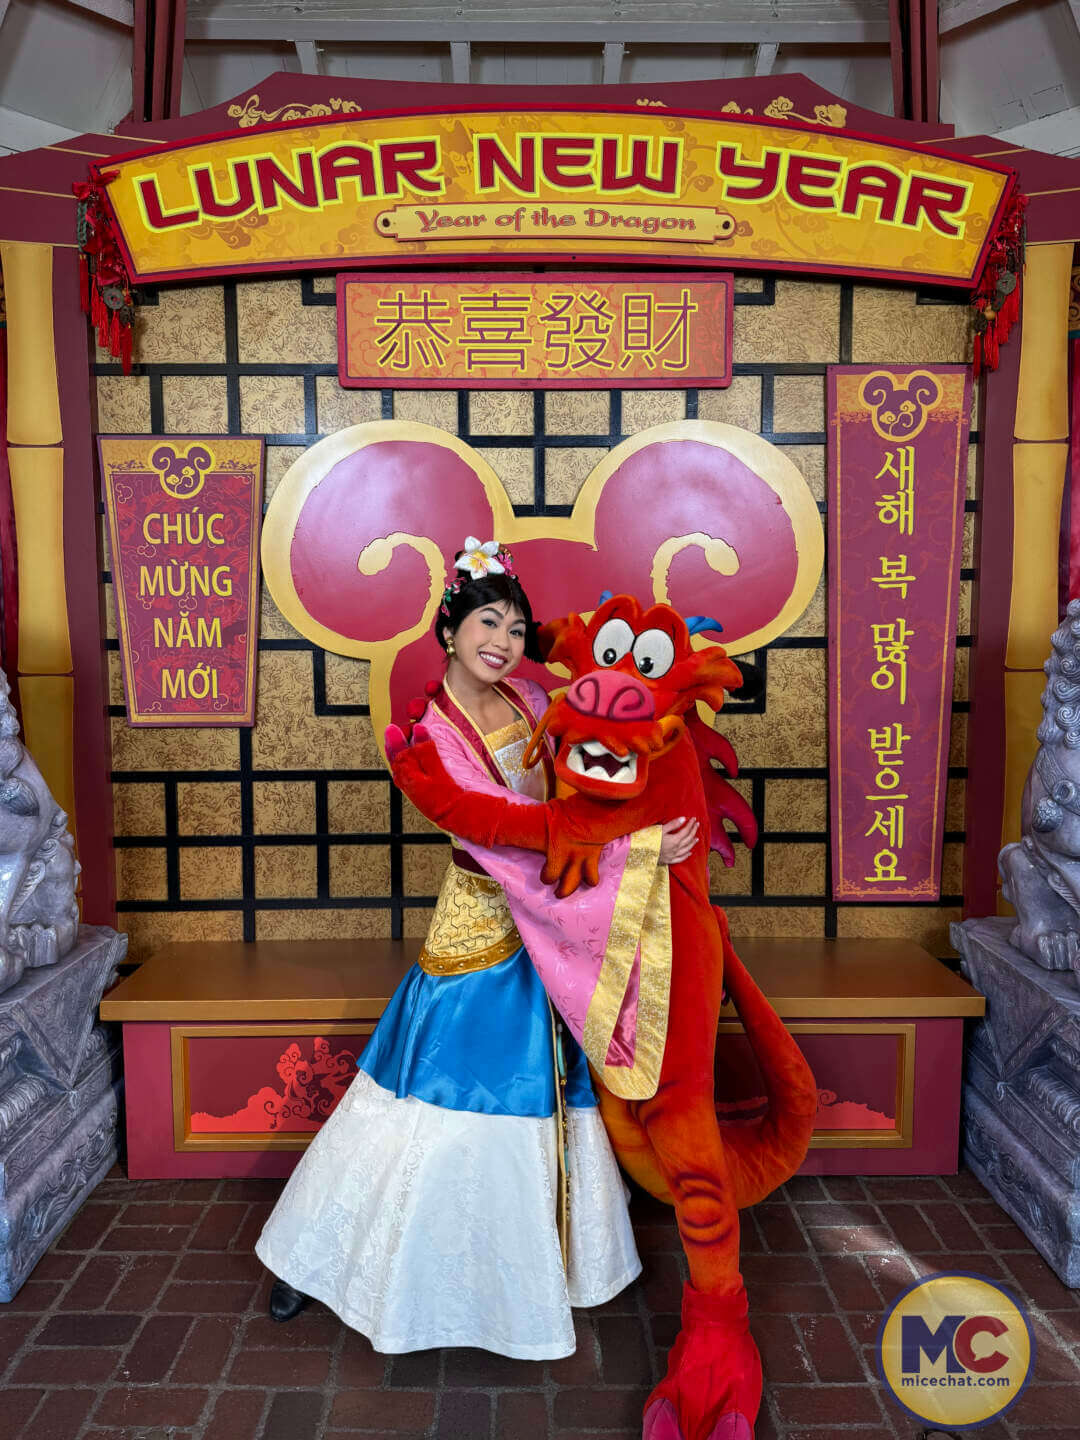 Lunar New Year, Ultimate Guide to Disney California Adventure&#8217;s Lunar New Year Celebration!